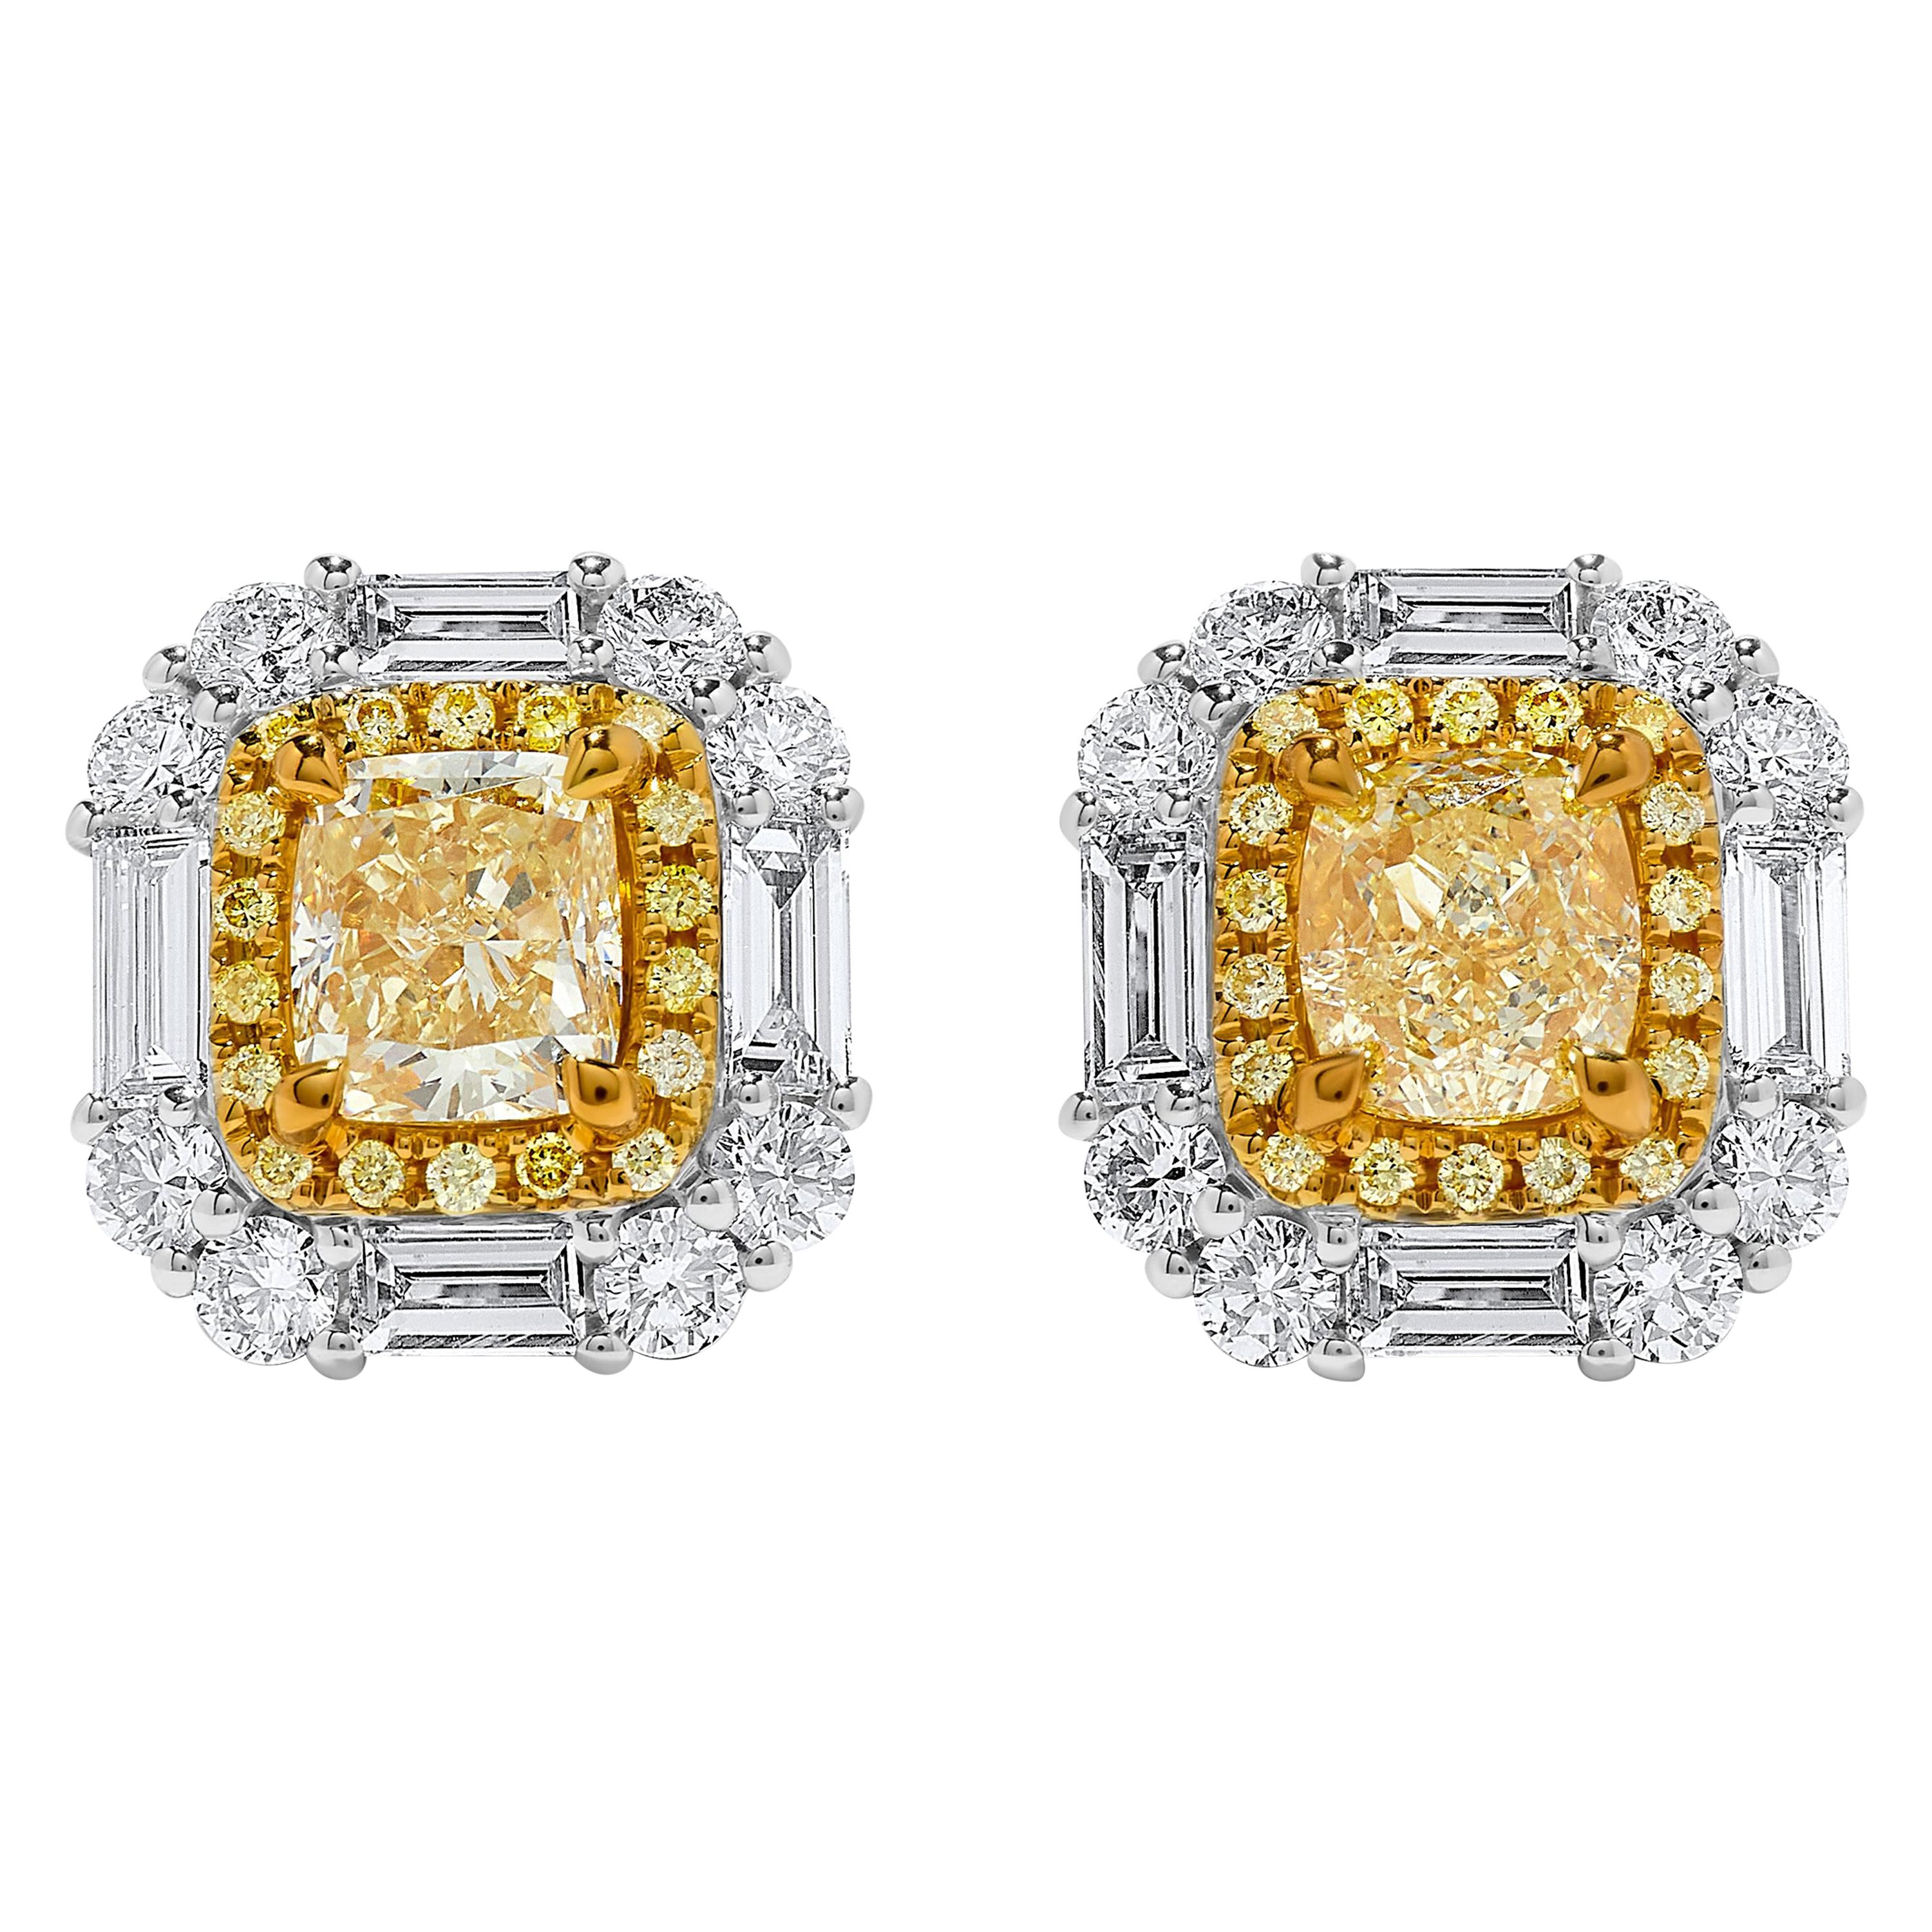 Natural Yellow Cushion Diamond 3.65 Carat TW Gold Stud Earrings For Sale